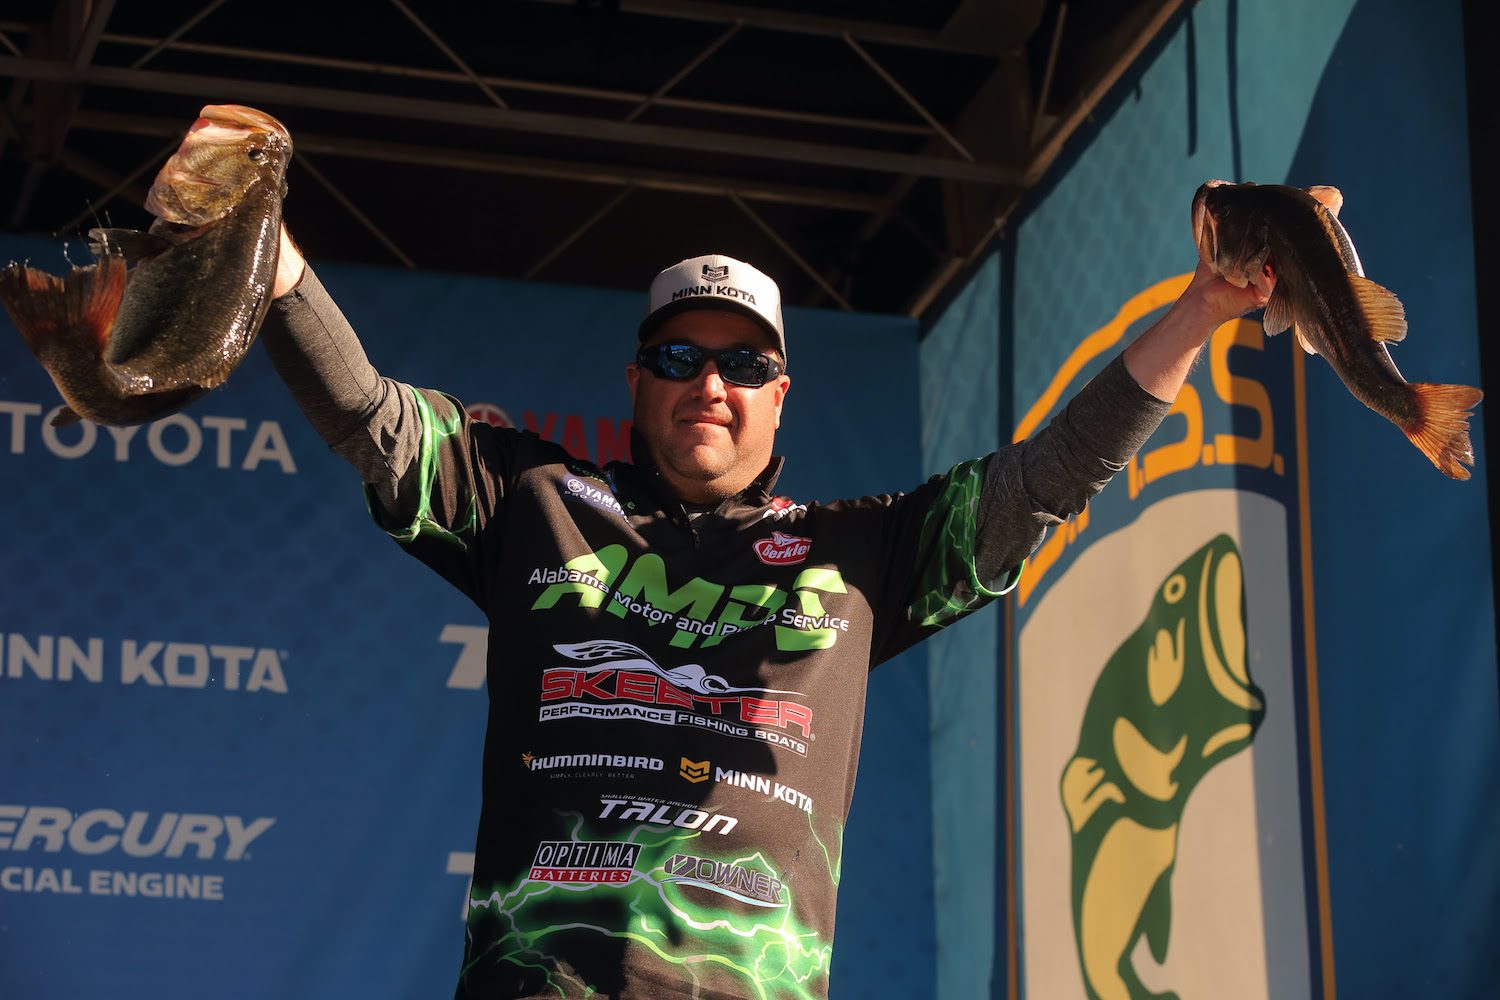 Jaye Relies On Experience To Claim Day 1 Lead In Bassmaster Elite At St. Johns River